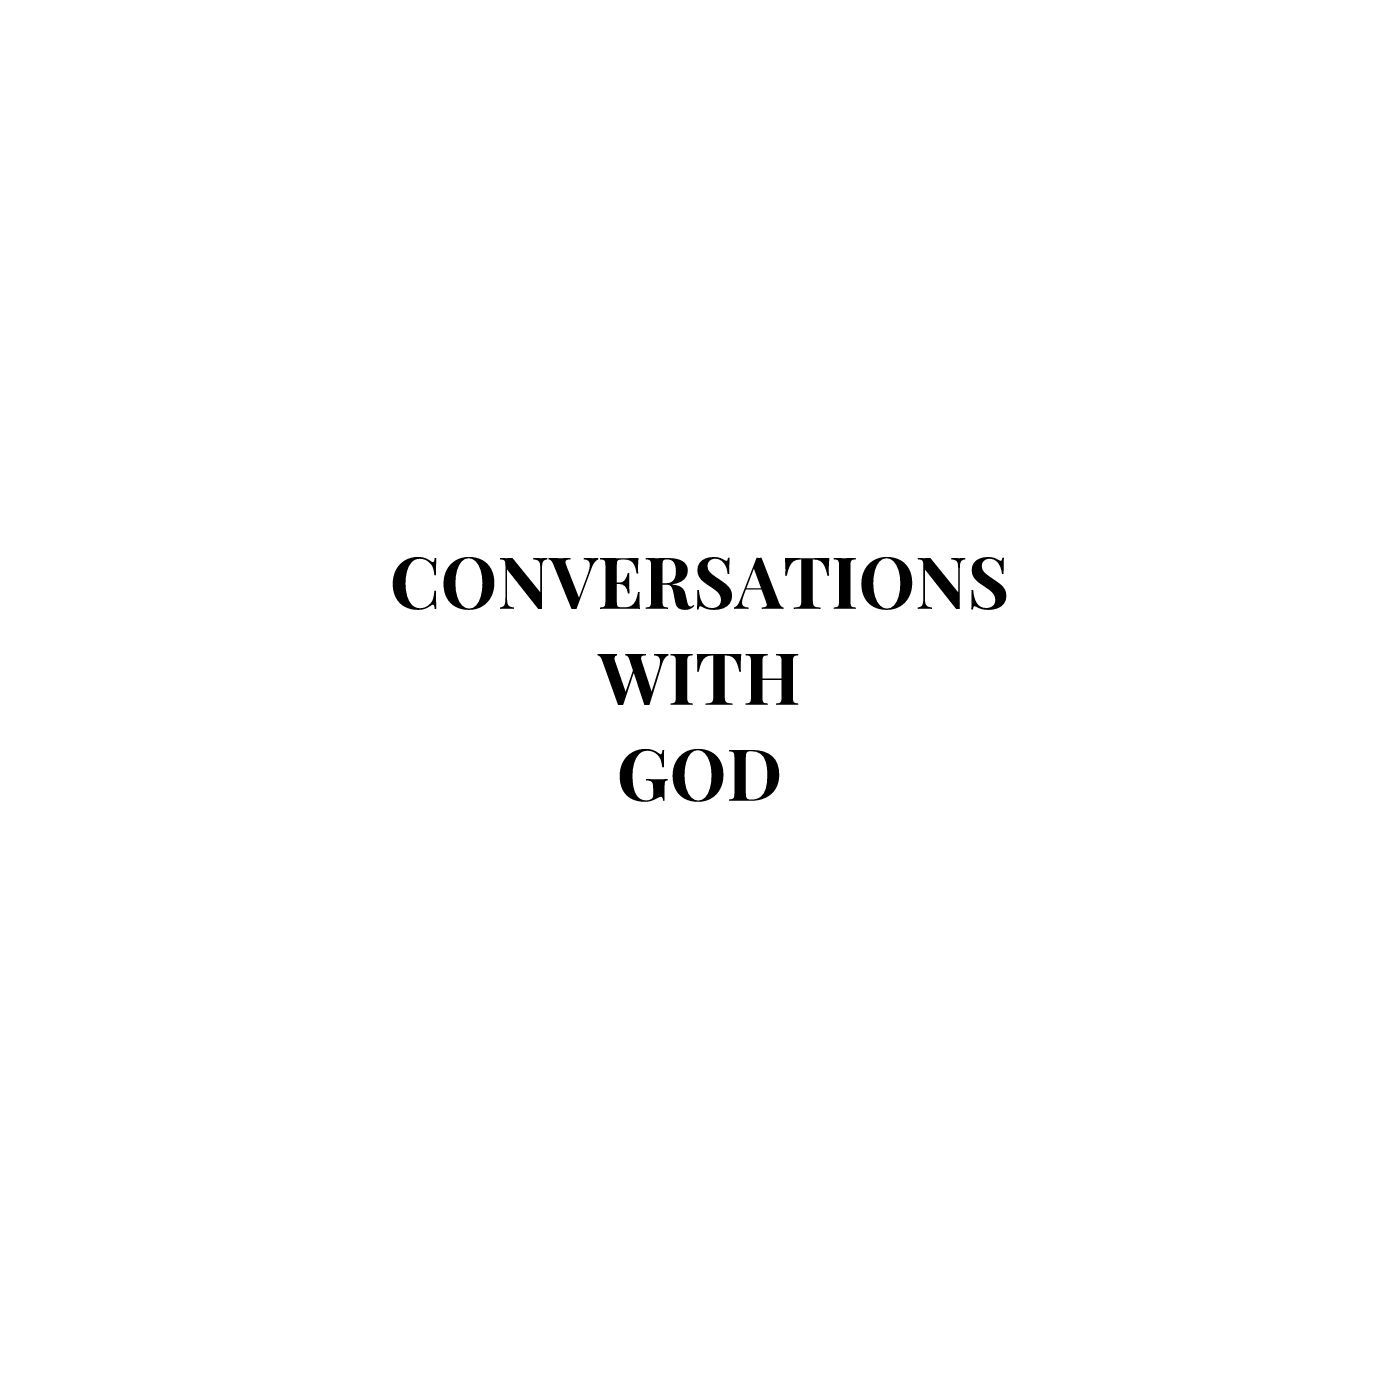 A podcast where I chat with god.